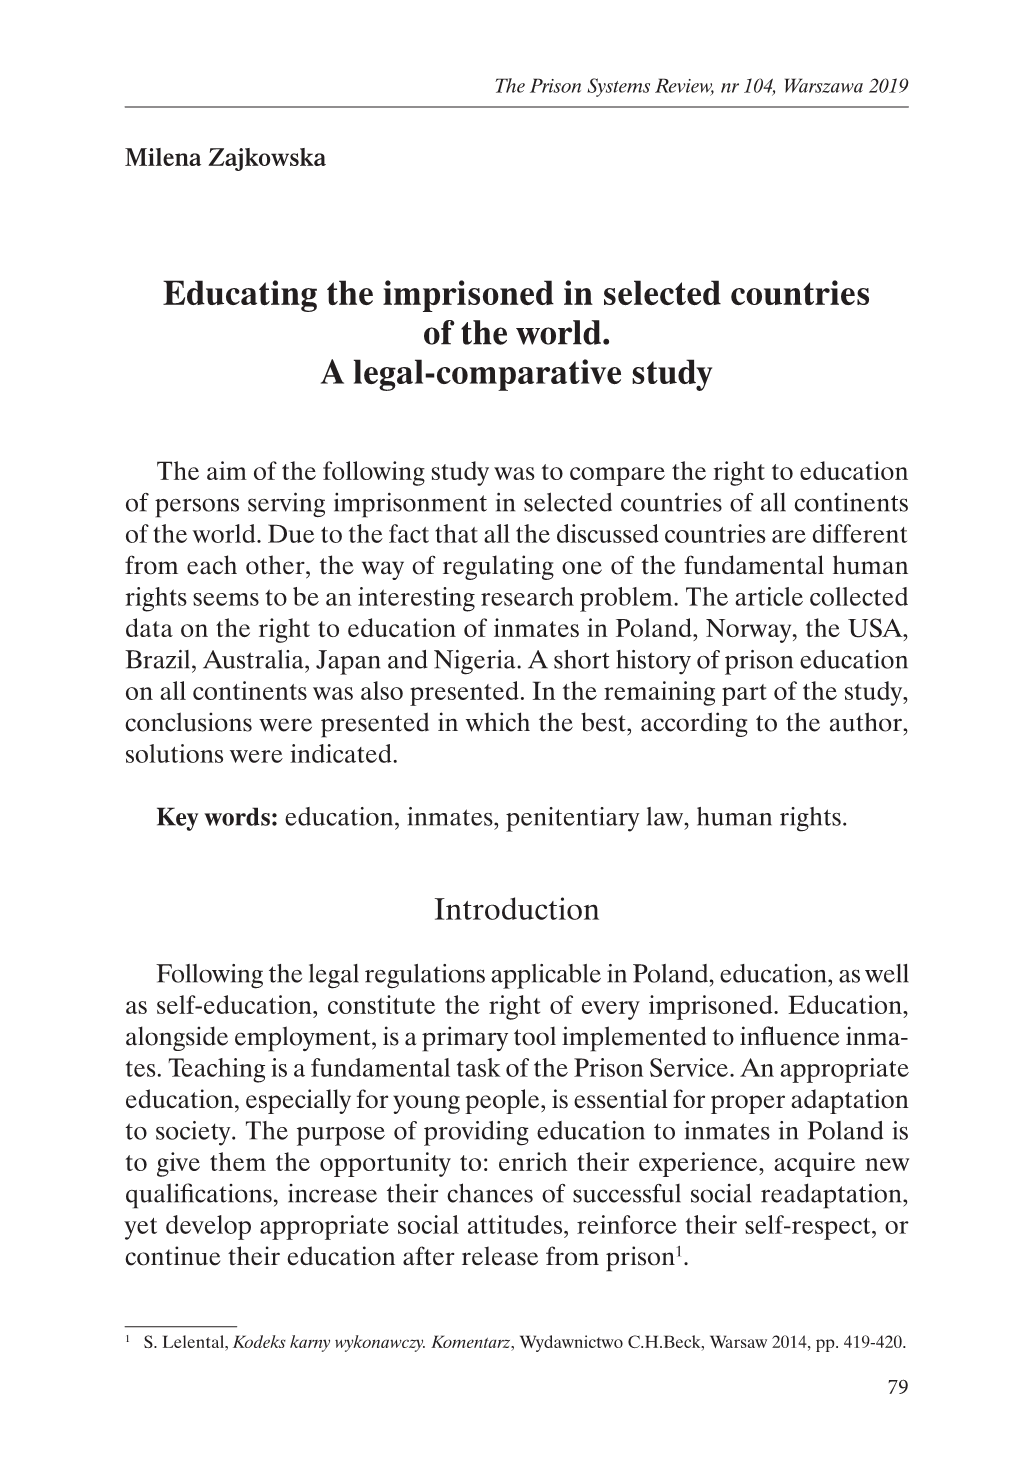 Educating the Imprisoned in Selected Countries of the World. a Legal-Comparative Study